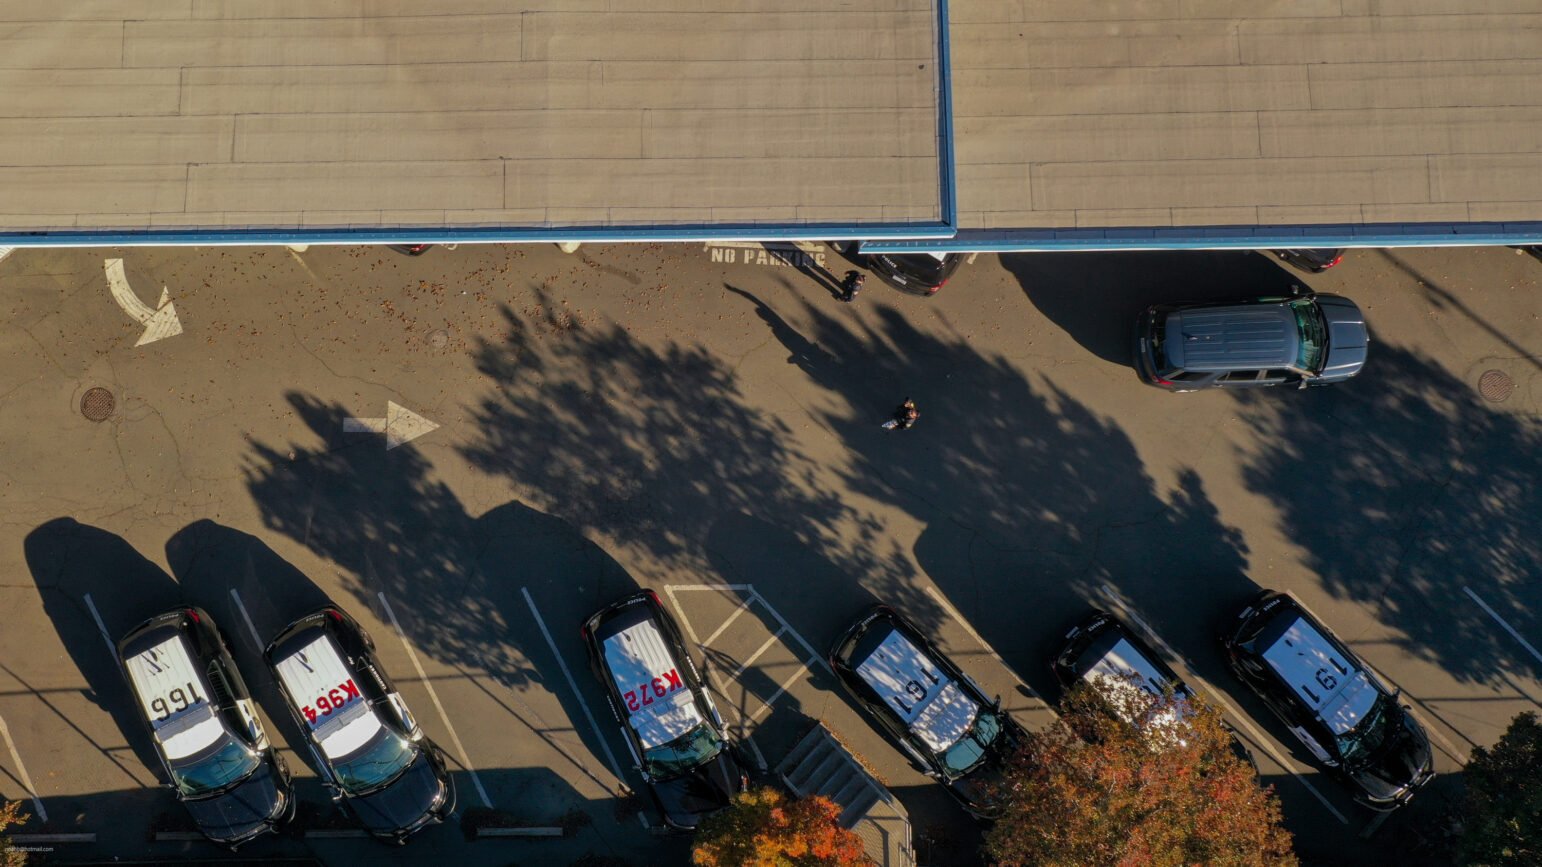 An aerial view captures the clear shadows of trees on a parking lot, with police cars lined up neatly beside a building in the calm of a bright, sunny day.